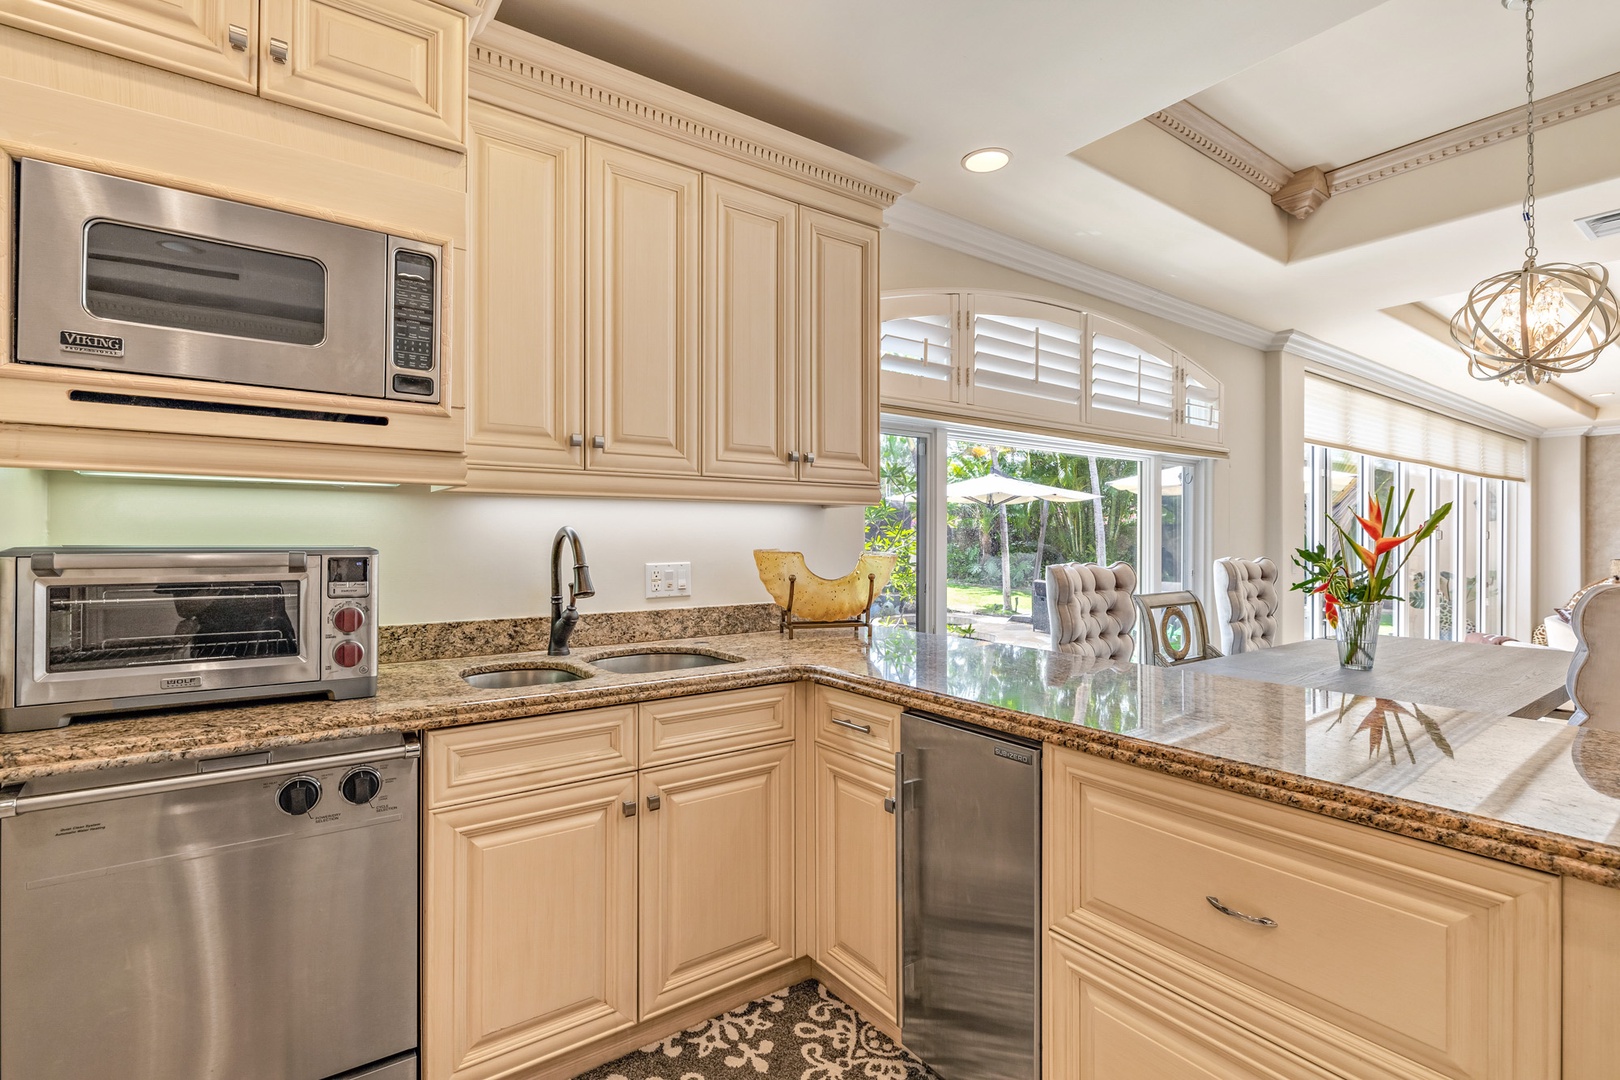 Honolulu Vacation Rentals, La Villa Kahala - Kitchen is equipped with stainless steel appliances